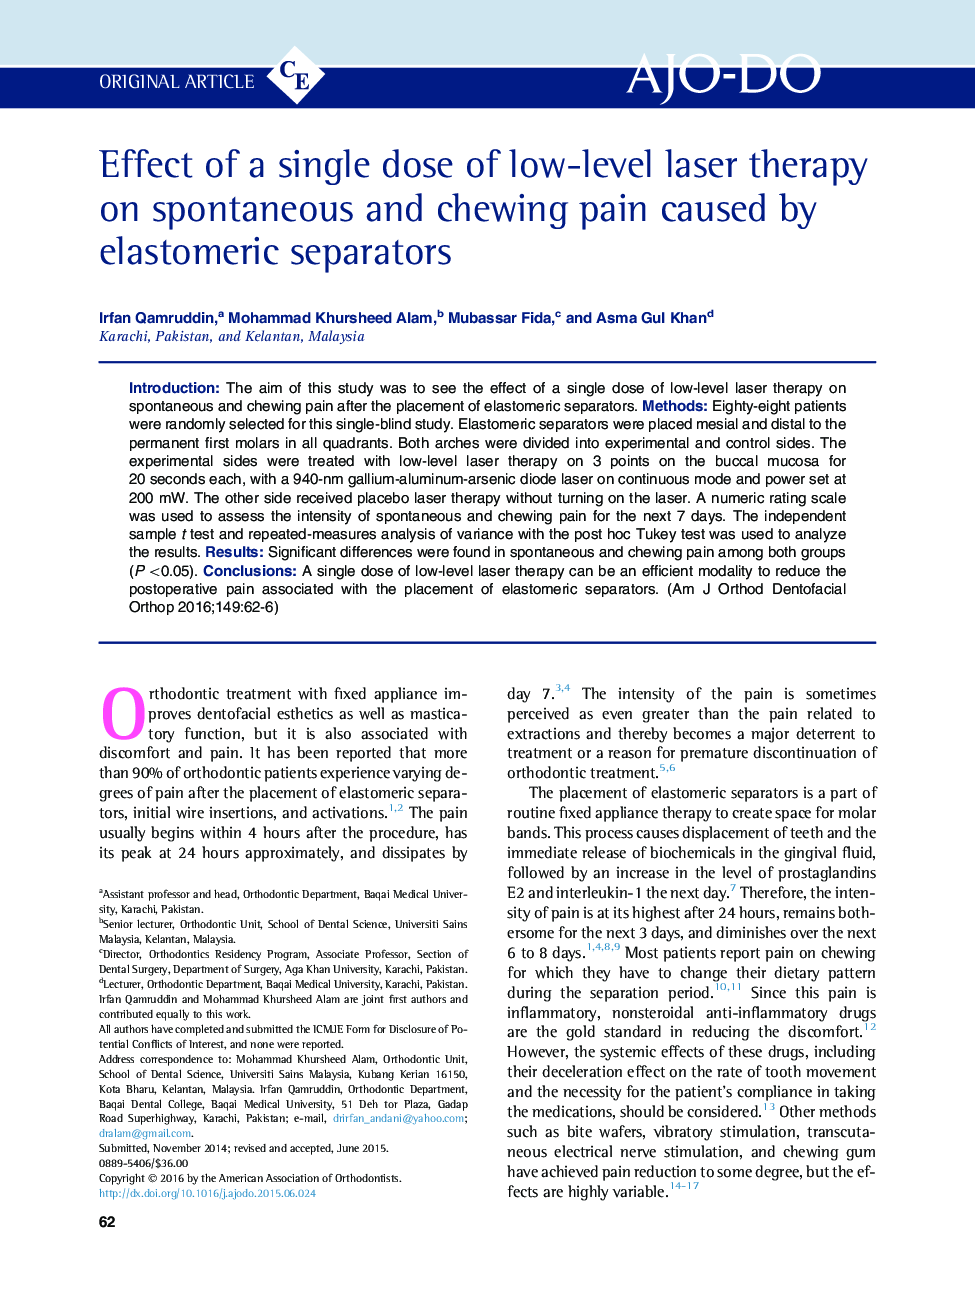 Effect of a single dose of low-level laser therapy on spontaneous and chewing pain caused by elastomeric separators 